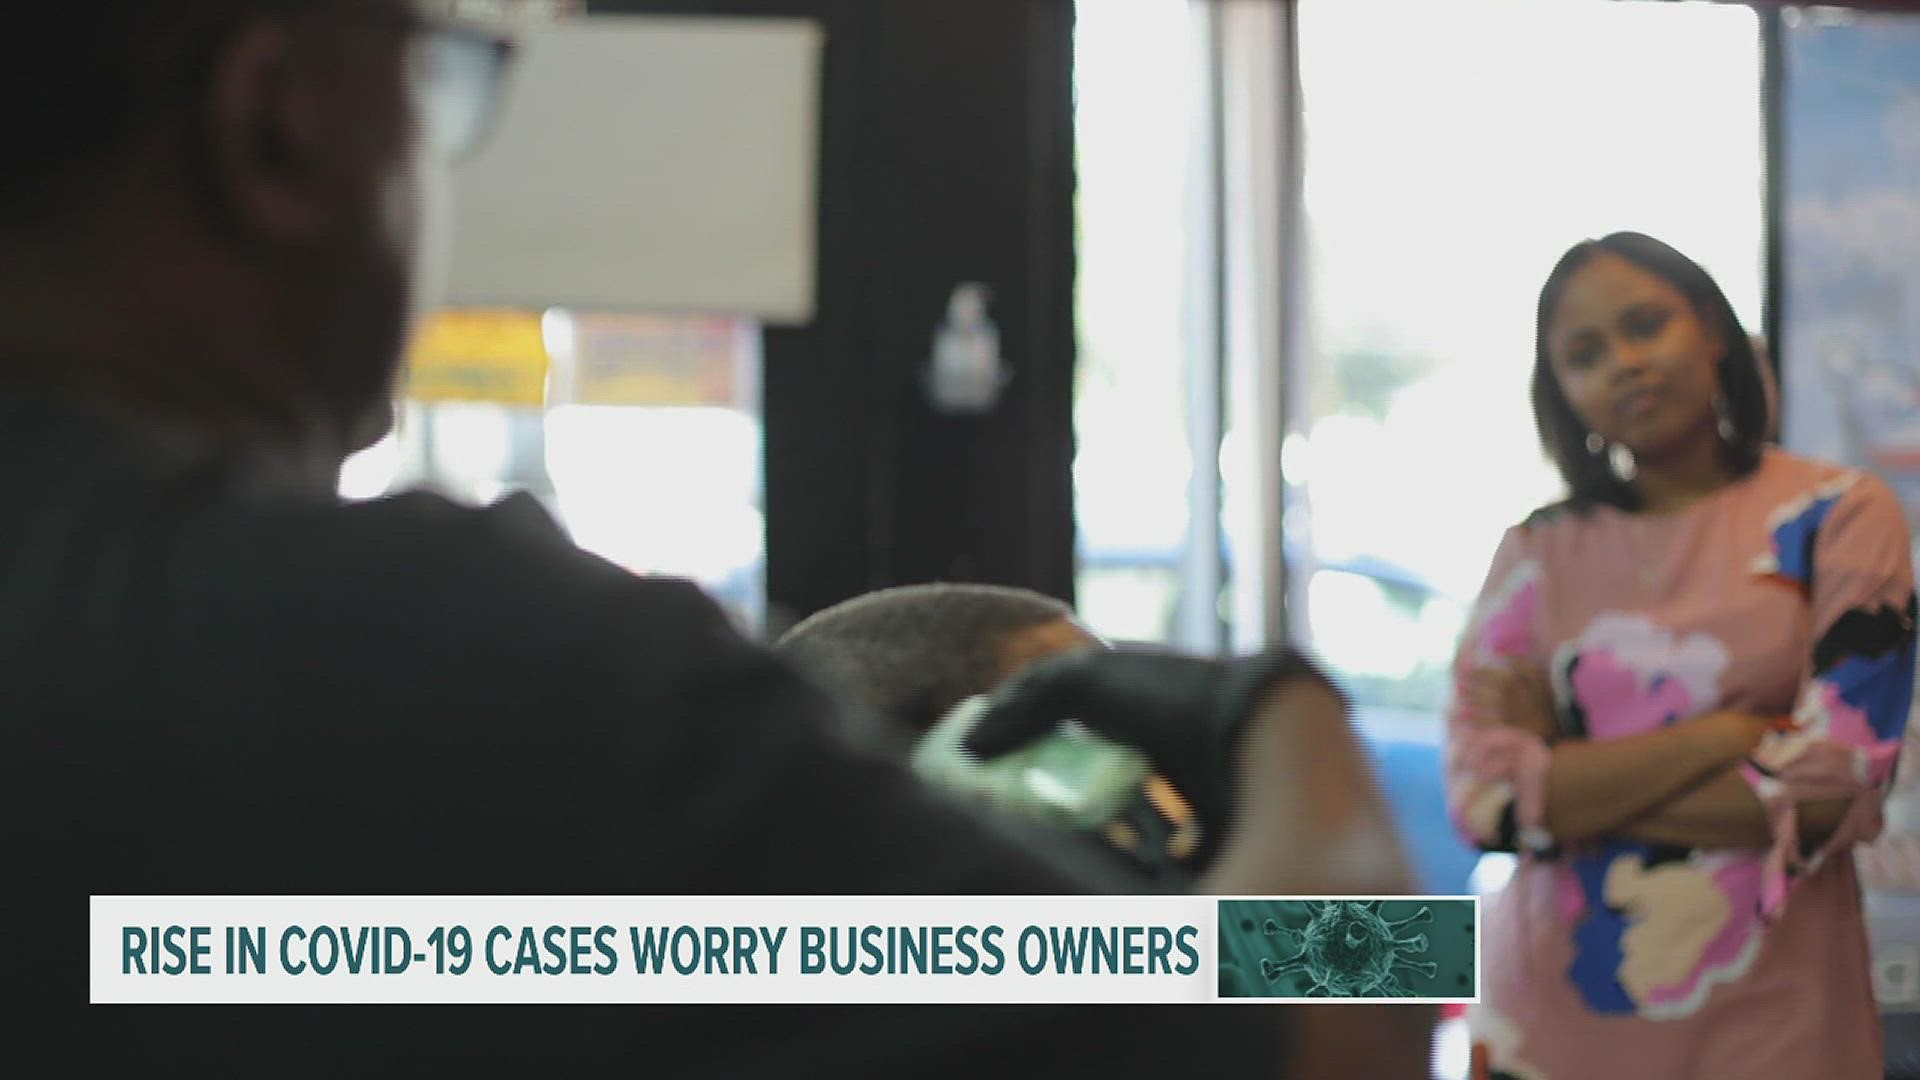 Owners hope they will not have to relive another lockdown.